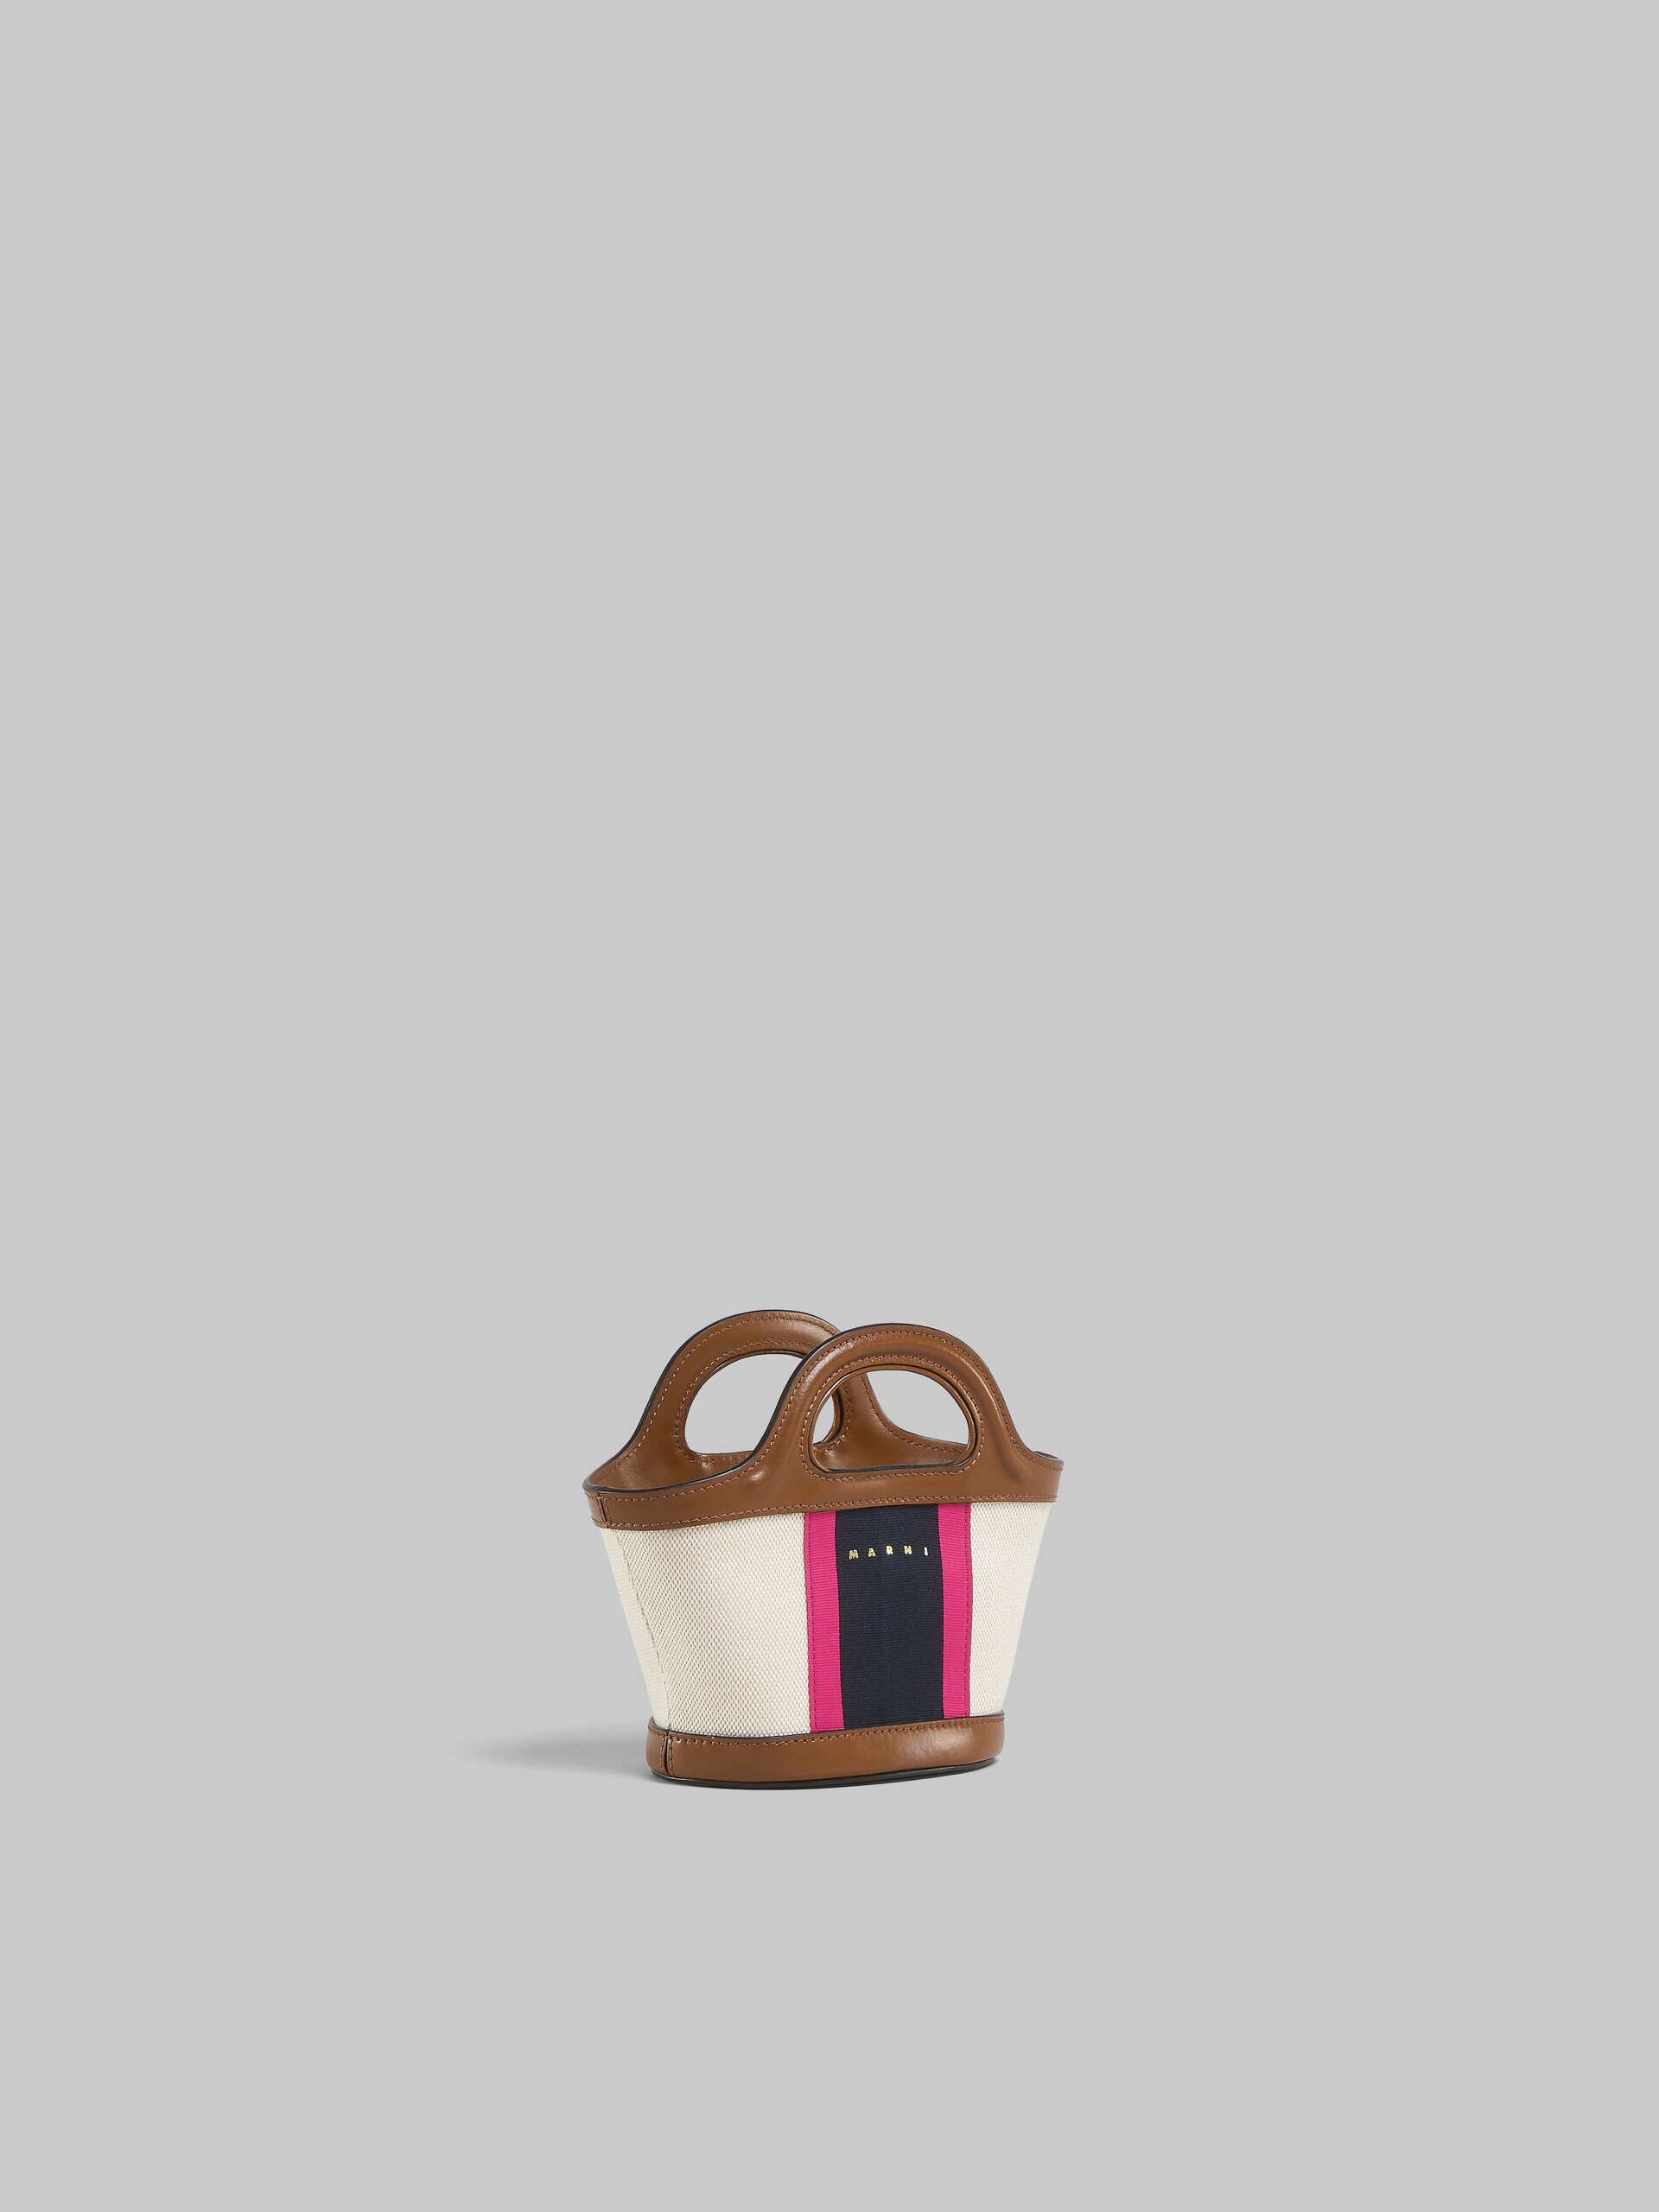 Tropicalia Micro Bag in Brown leather and striped canvas - Handbag - Image 6